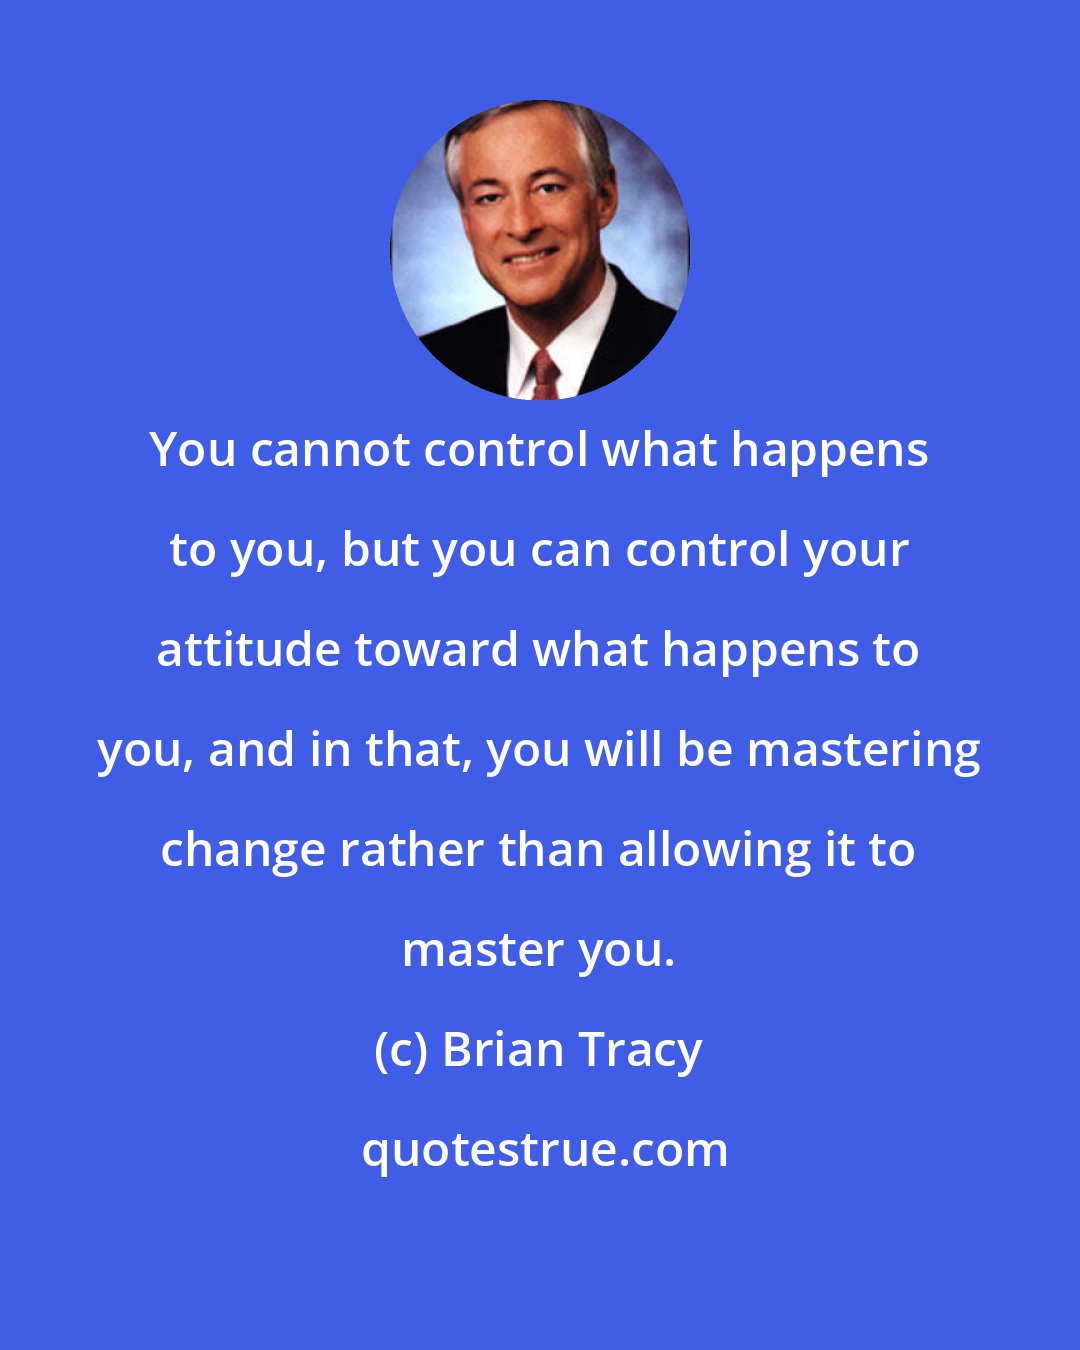 Brian Tracy: You cannot control what happens to you, but you can control your attitude toward what happens to you, and in that, you will be mastering change rather than allowing it to master you.